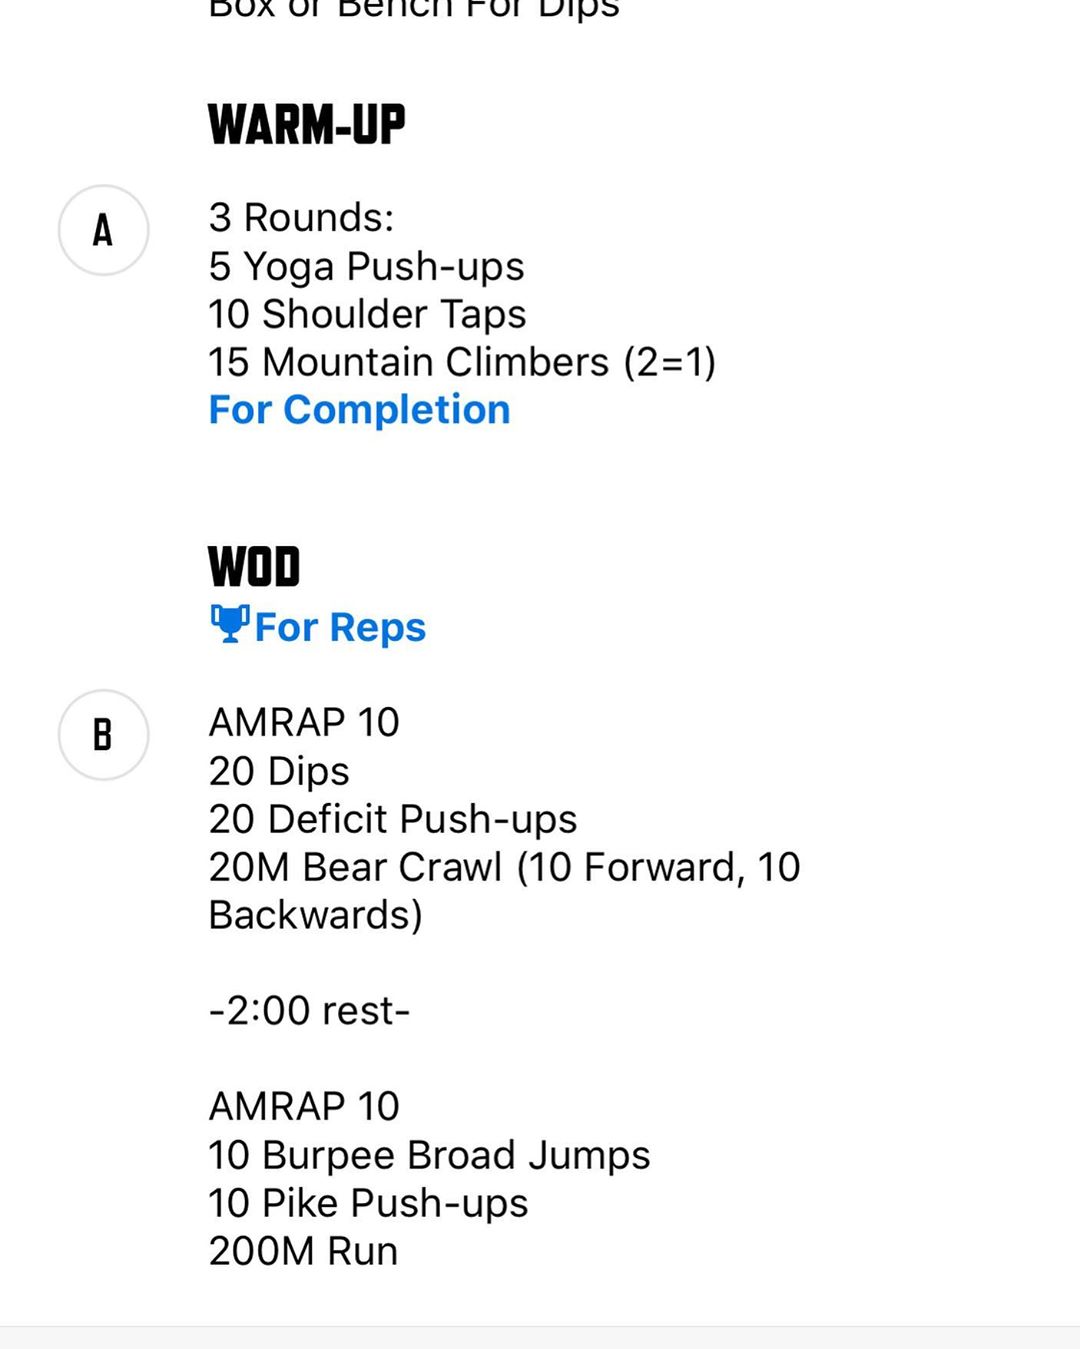 Bodyweight n’ Isolate. Day 1.
DM for the access code